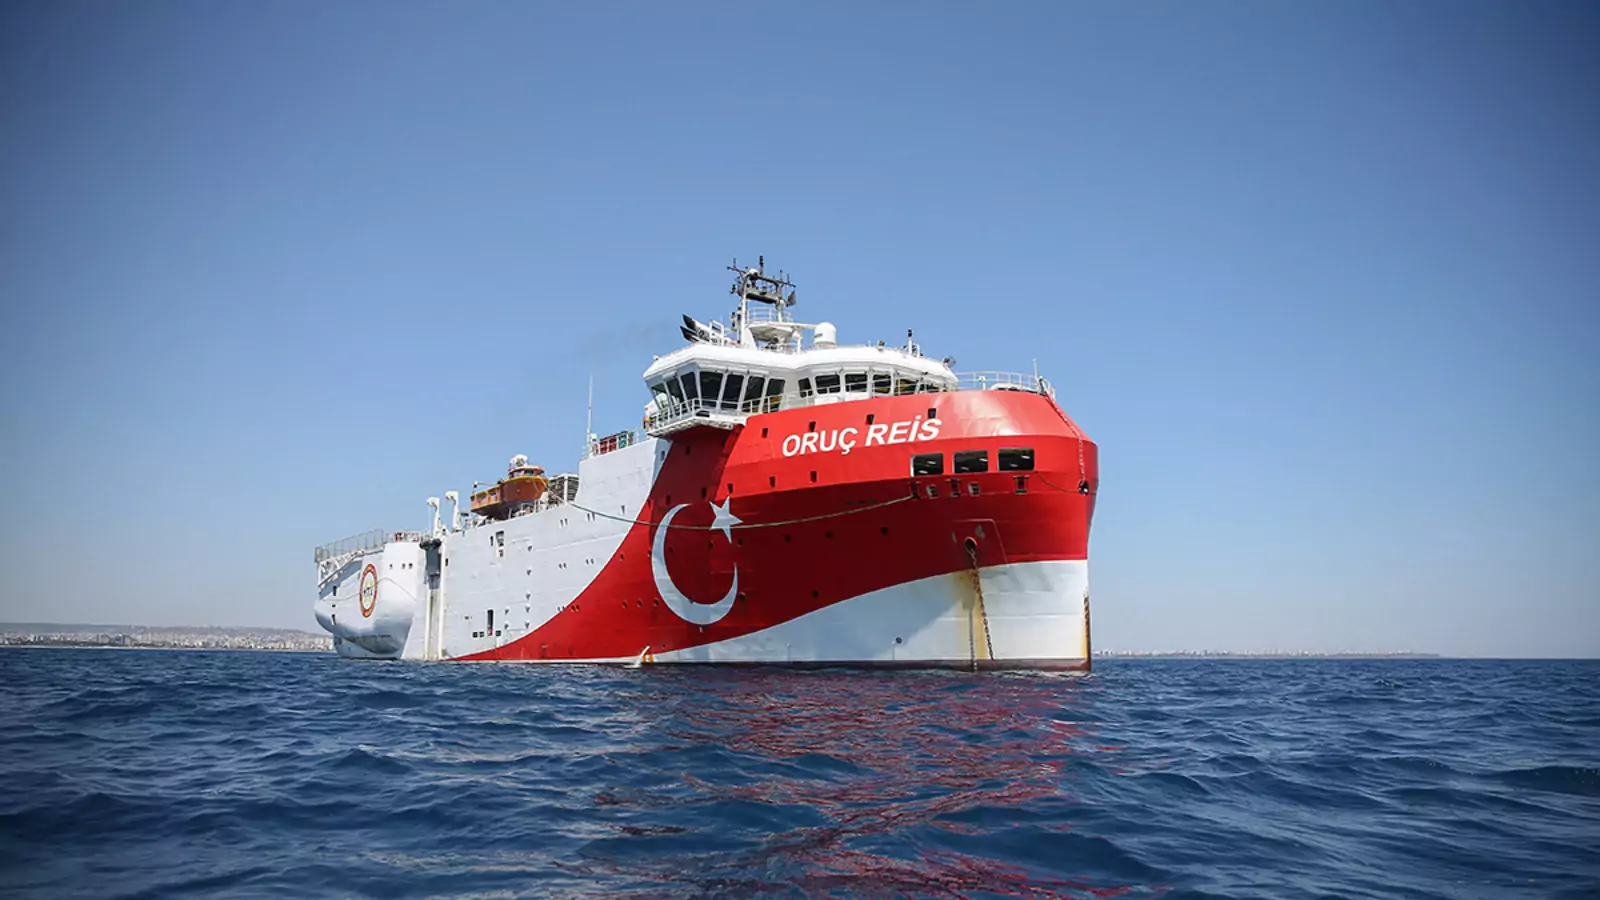 Oruc Reis seismic research vessel is seen as it is ready for a new seismic research expedition in the Eastern Mediterranean.